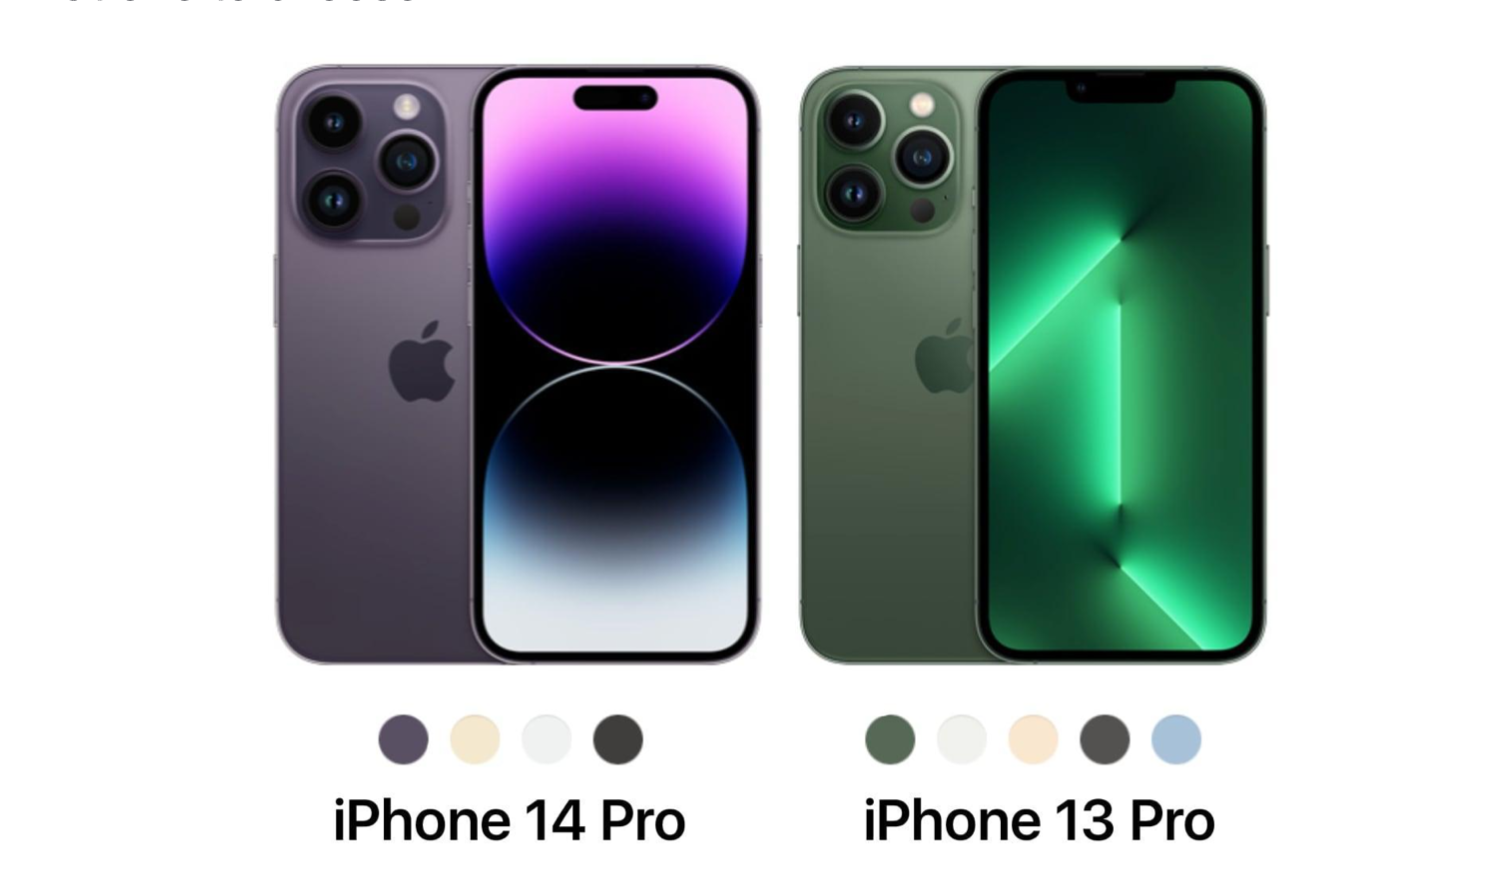 iPhone 14 Pro vs iPhone 13 Pro: What's changed on the high-end iPhone?